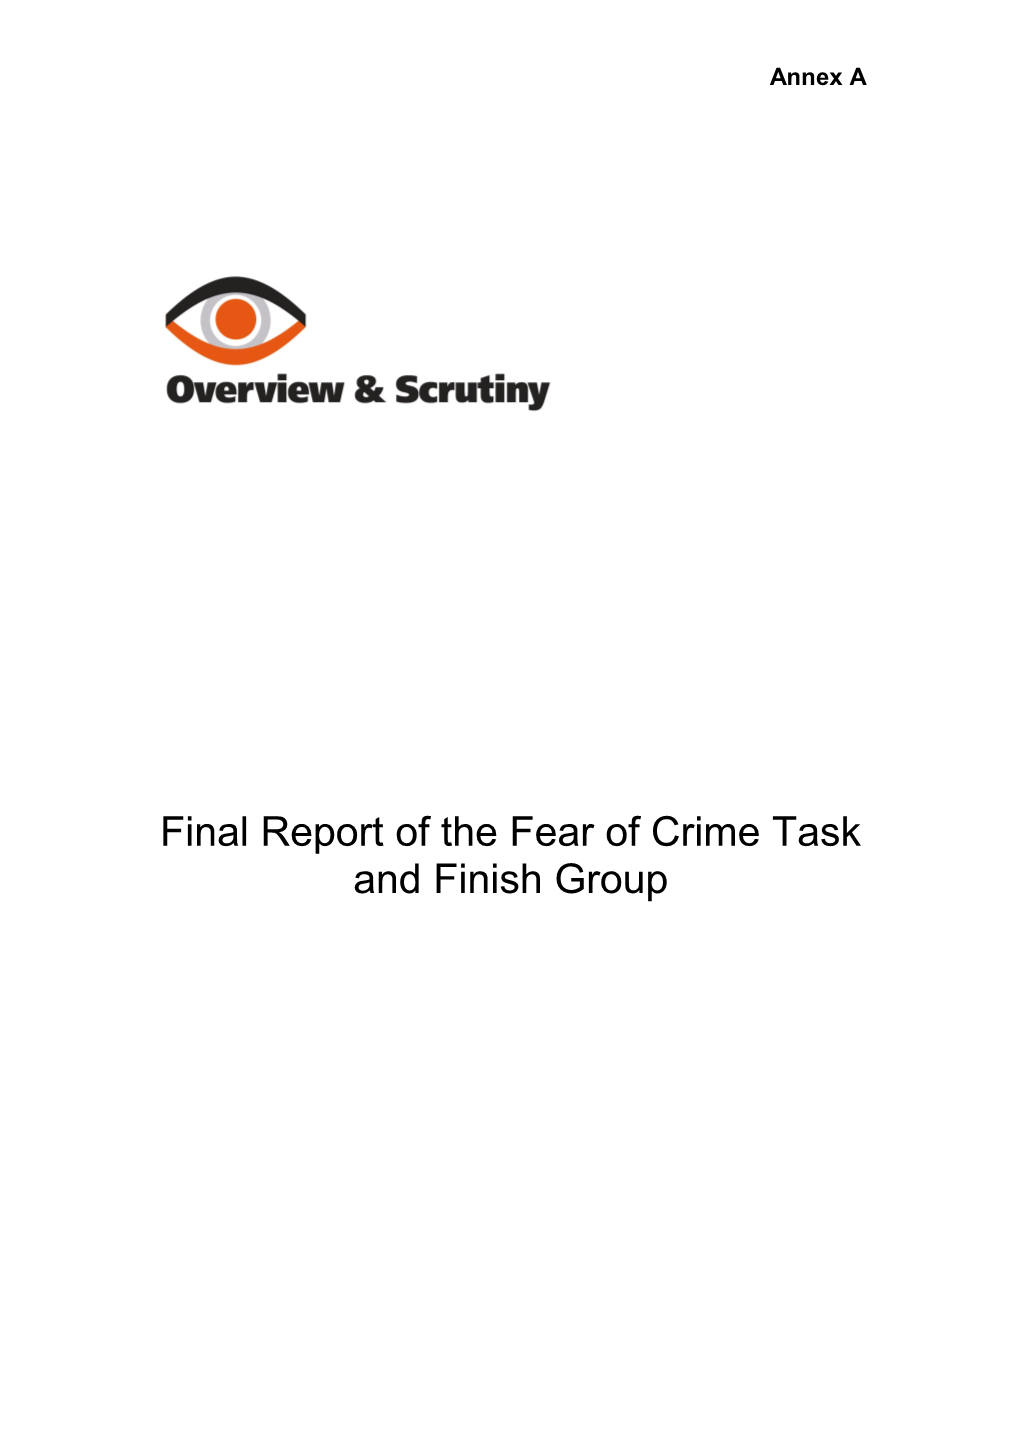 Fear of Crime 2010 Report